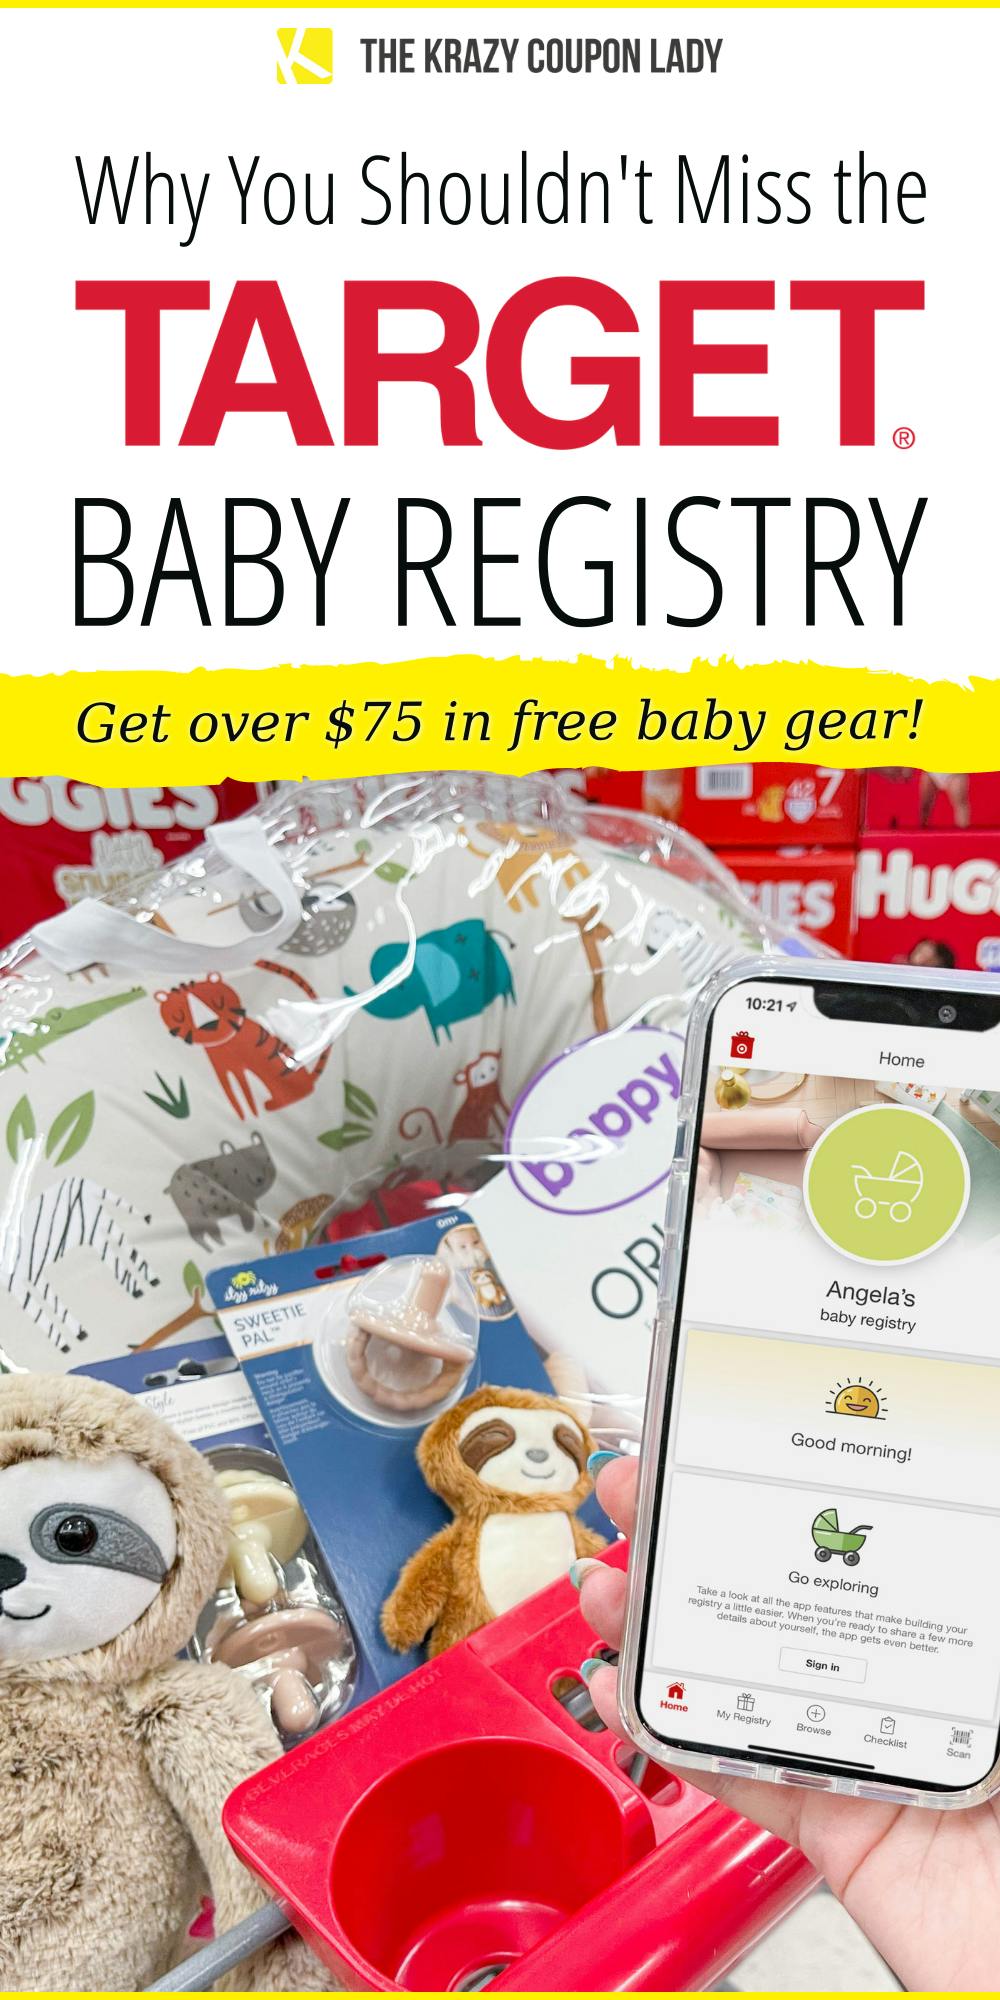 Target Baby Registry Pinterest V4 The Krazy Coupon Lady 1623349141 1623349141 ?auto=compress,format&fit=max